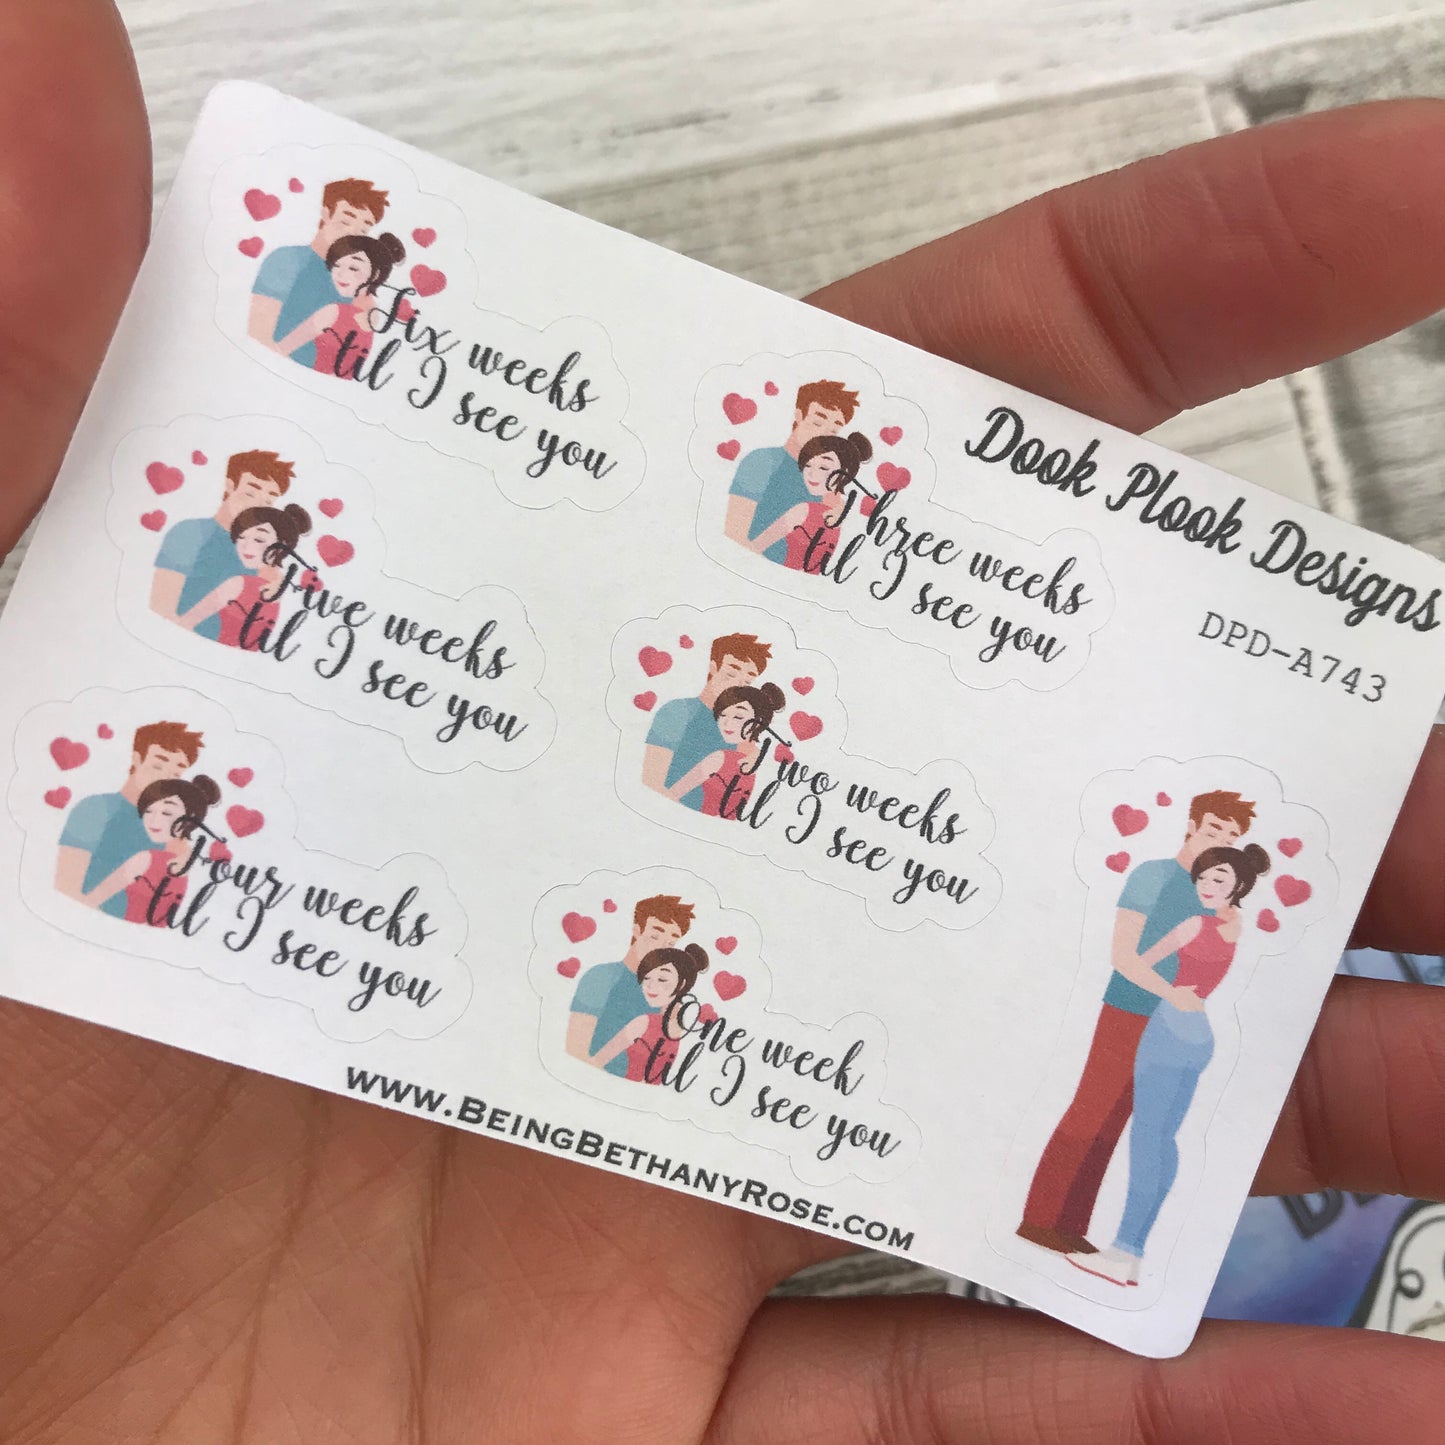 6 Weeks 'Til I See You stickers - Small Sampler Size (A743)